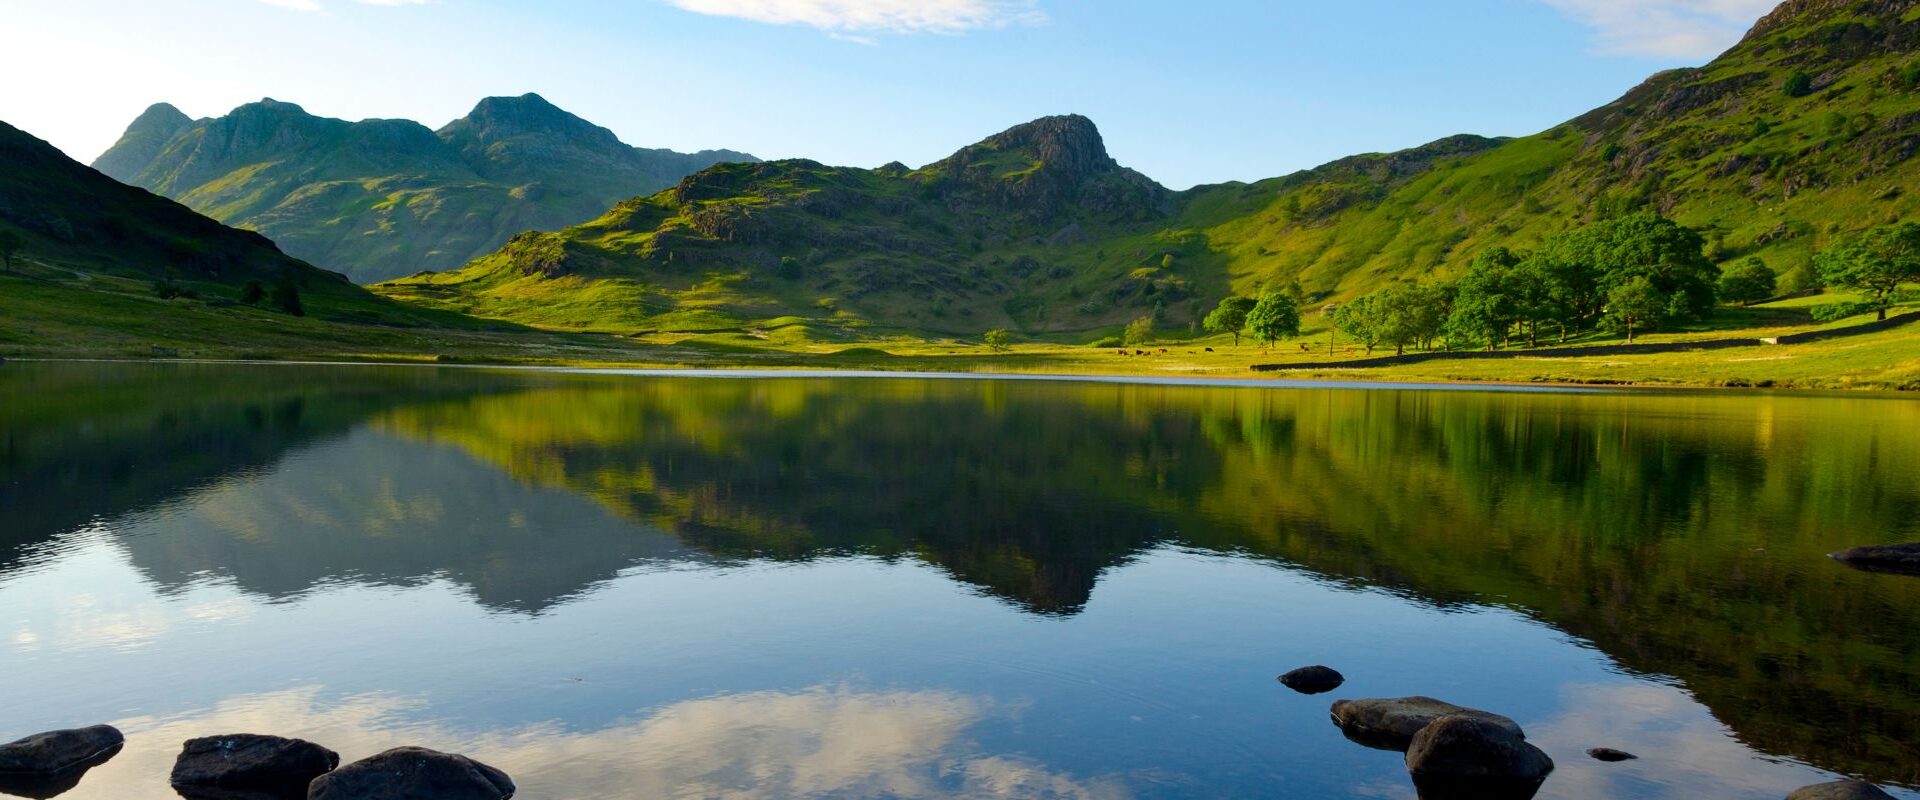 Holiday Cottages in Cumbria